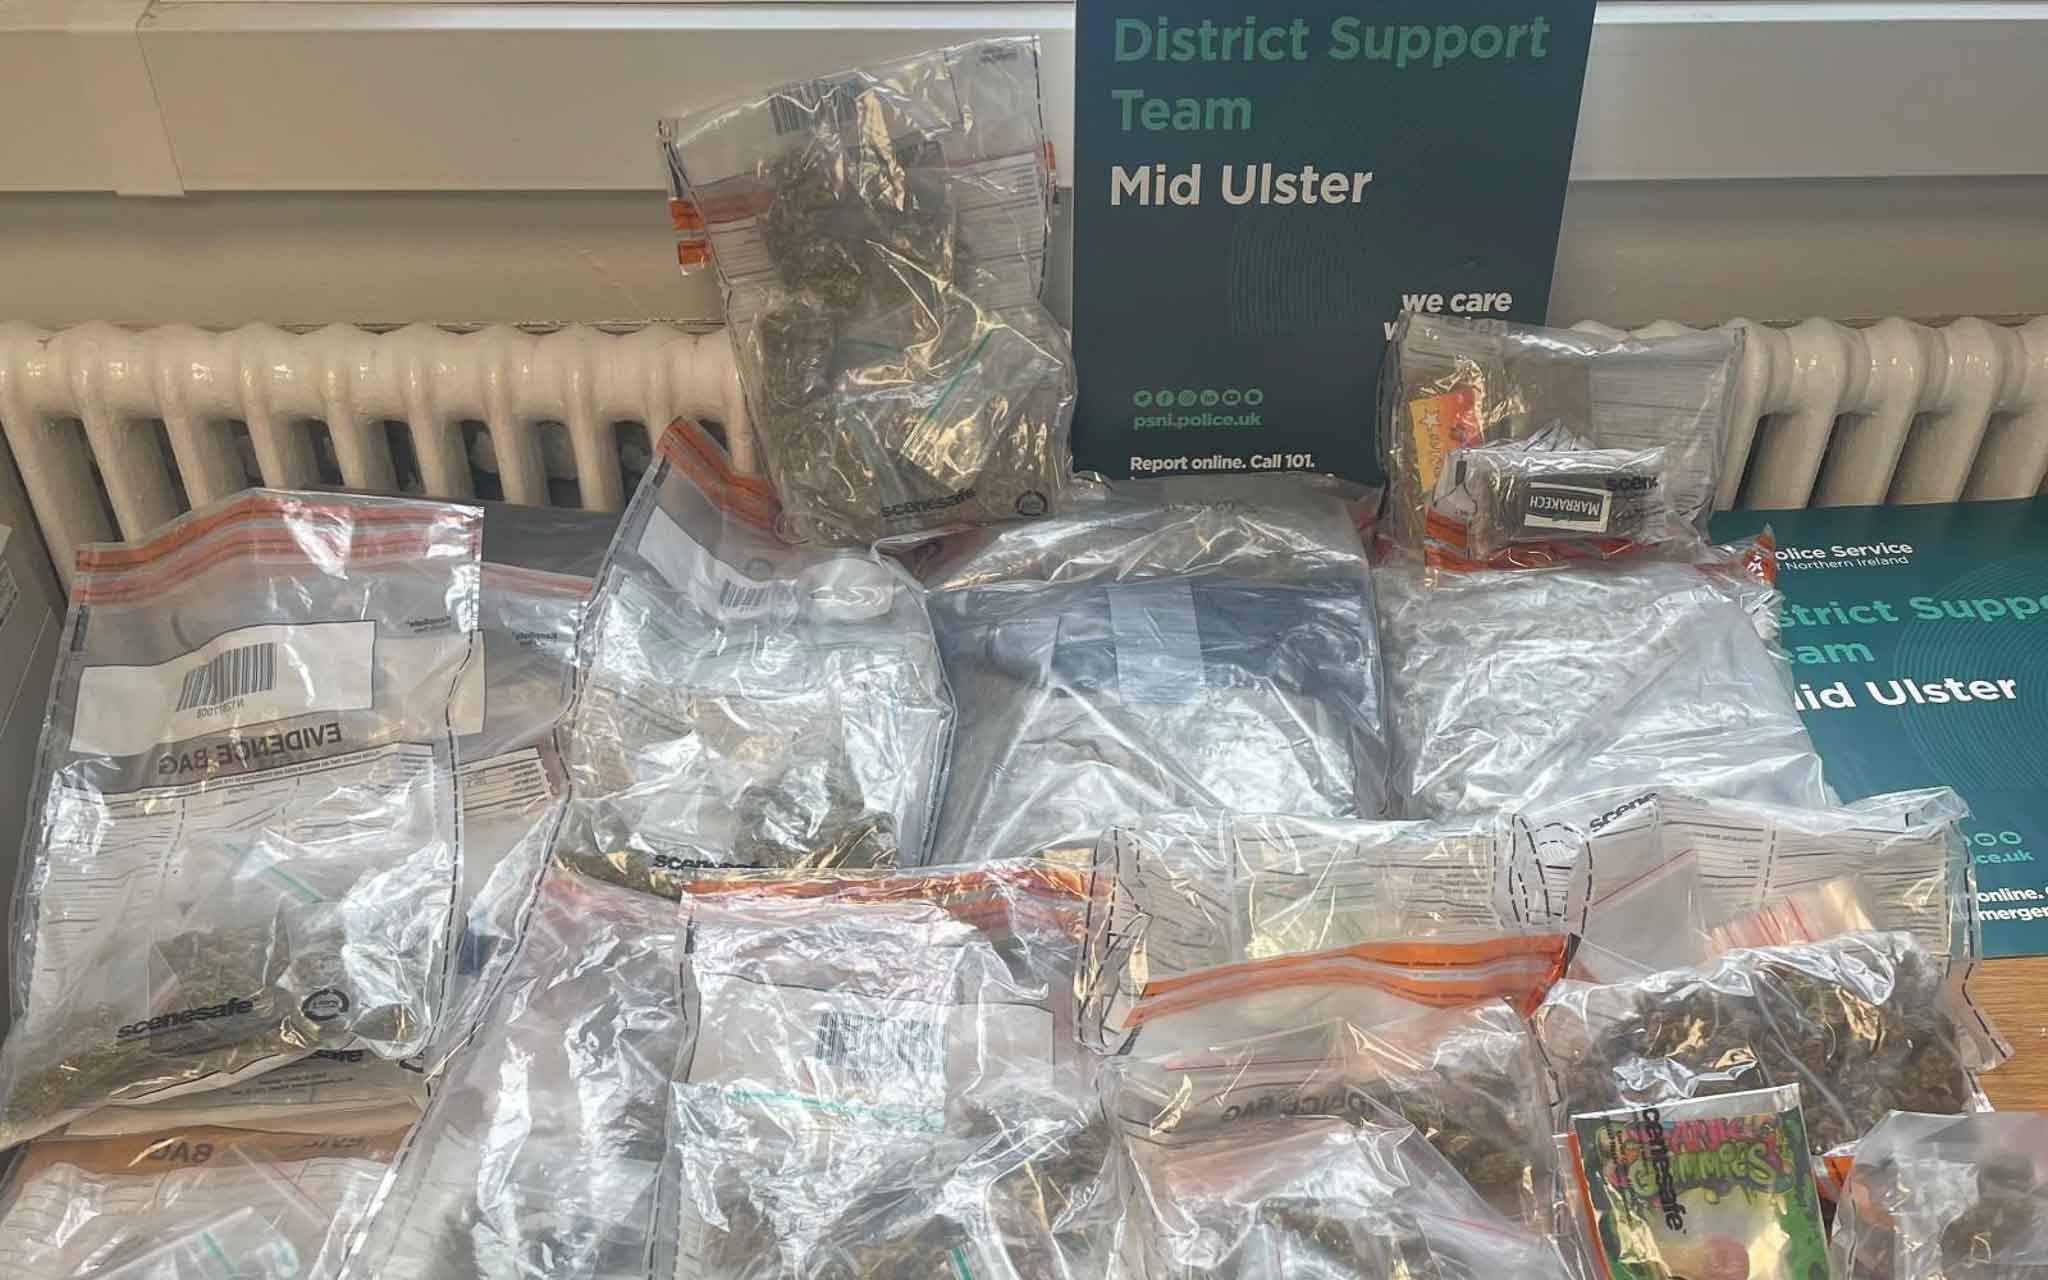 Cannabis valued around £290,000 has been seized in Cookstown.